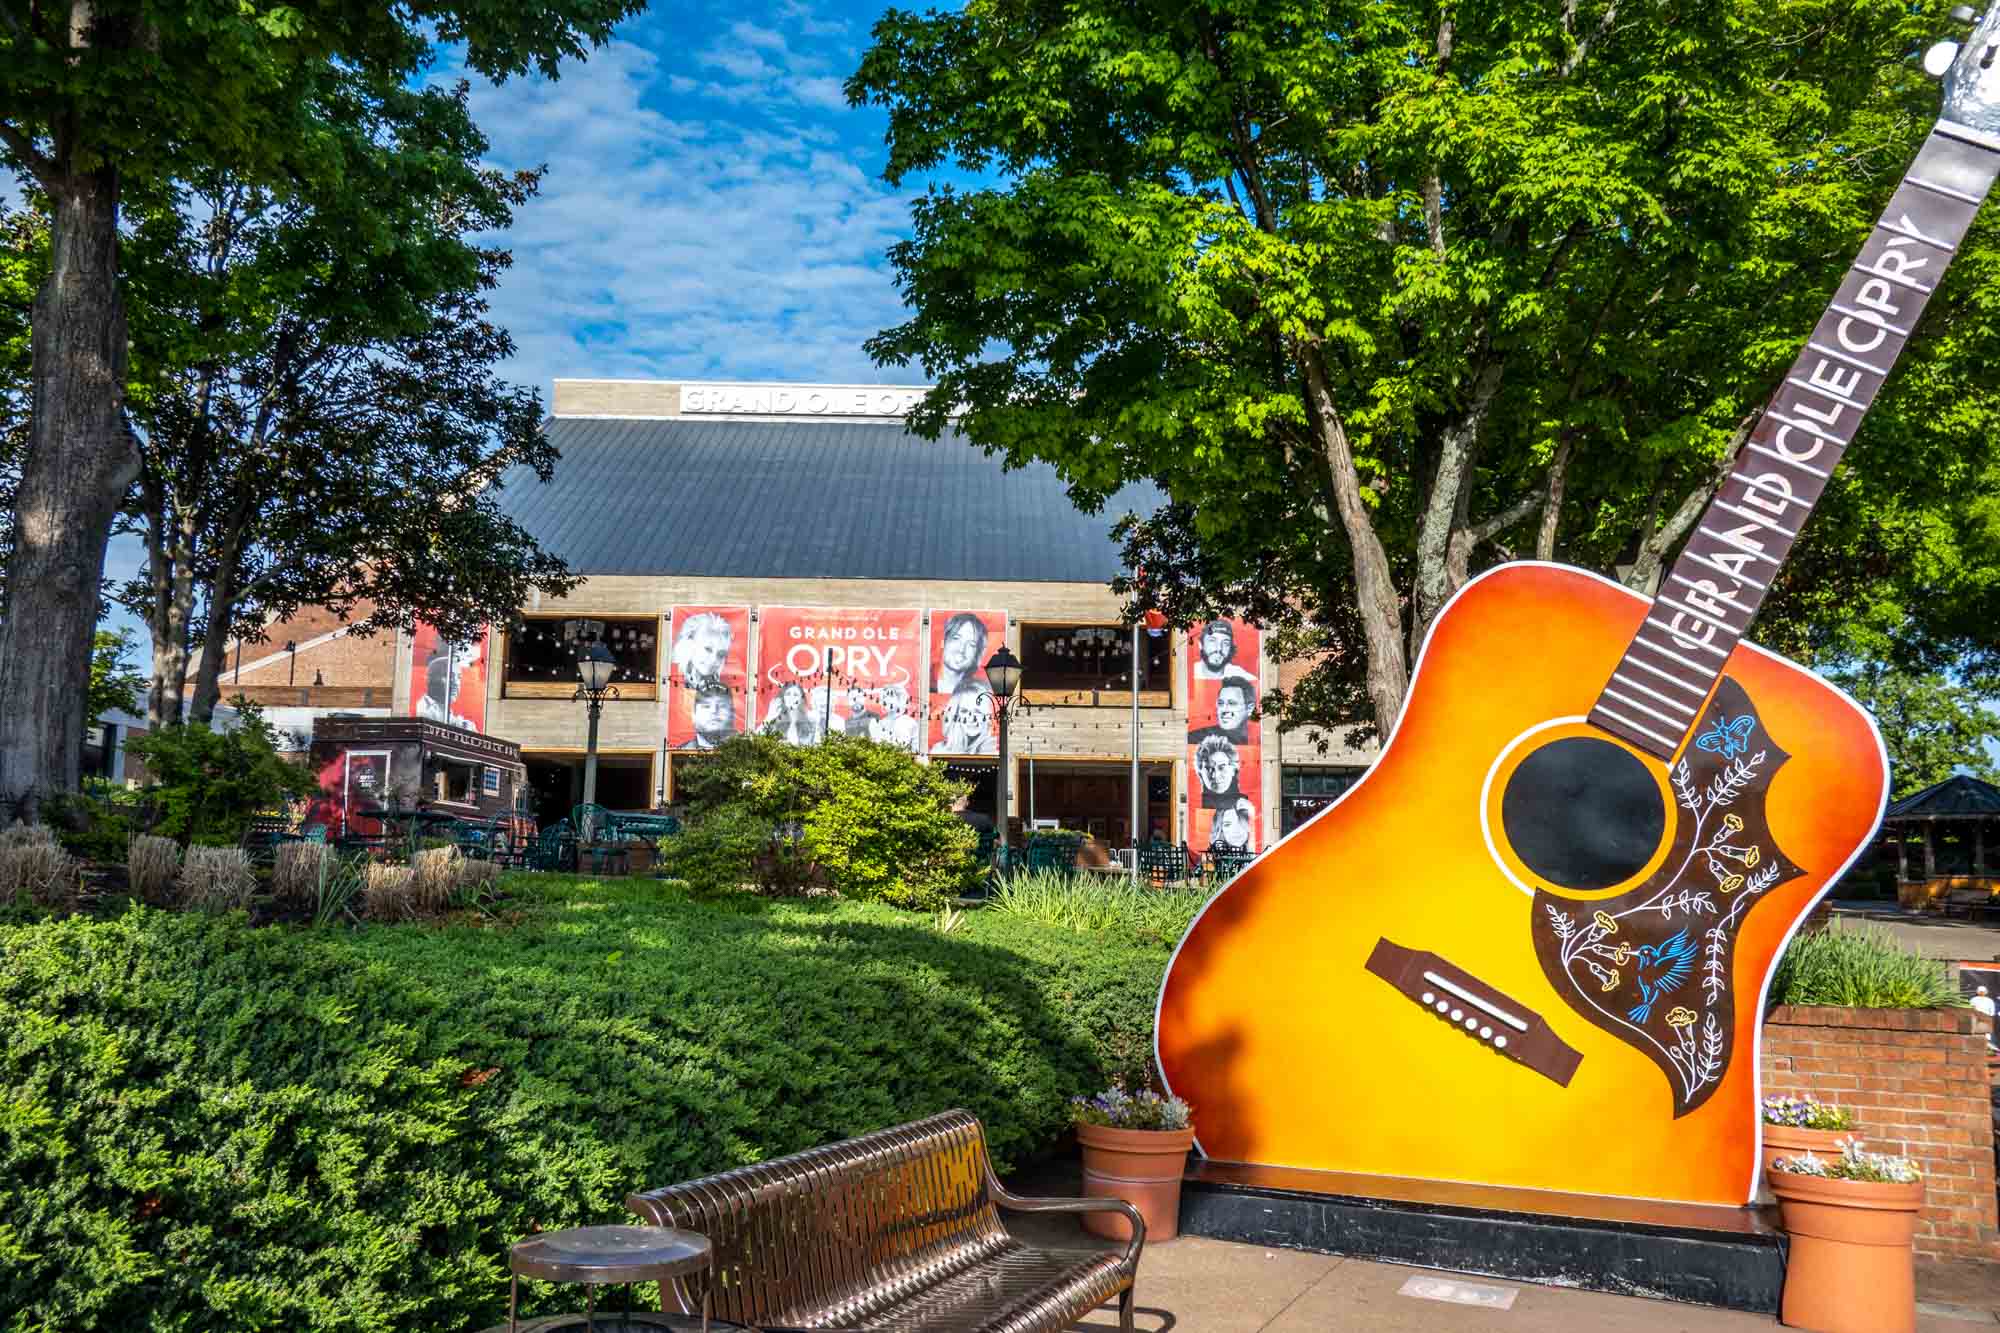 Exterior of the Grand Ole Opry